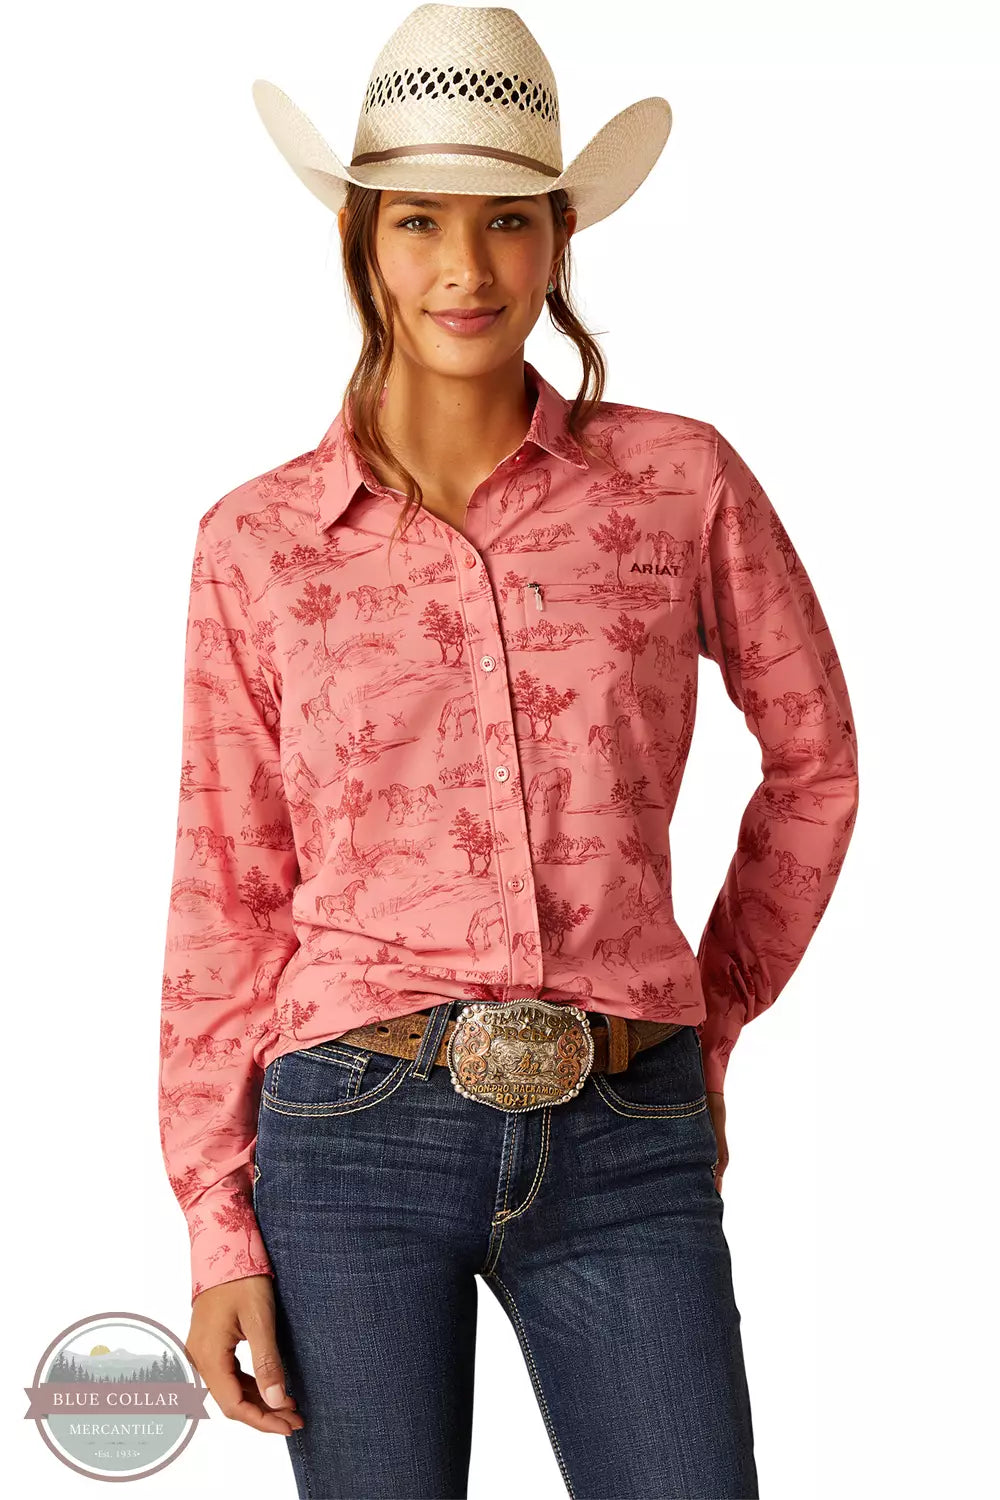 Ariat 10048862 VentTEK Stretch Shirt in Faded Rose Toile Front View